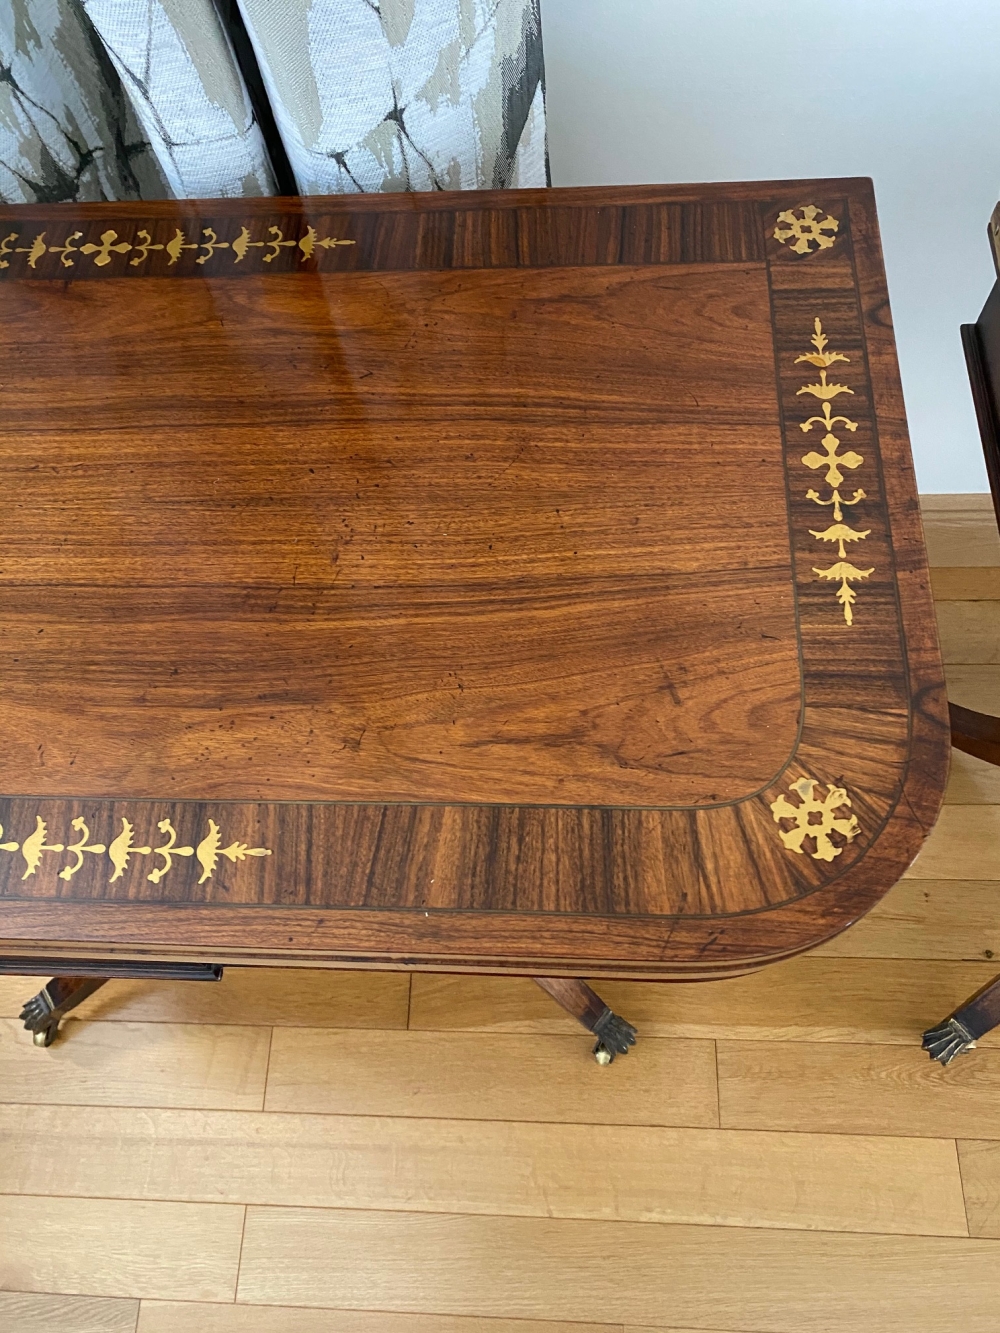 A VERY FINE PAIR OF FOLD OVER ROSEWOOD CARD TABLES, each with brass inlaid decoration, the tops open - Image 6 of 12